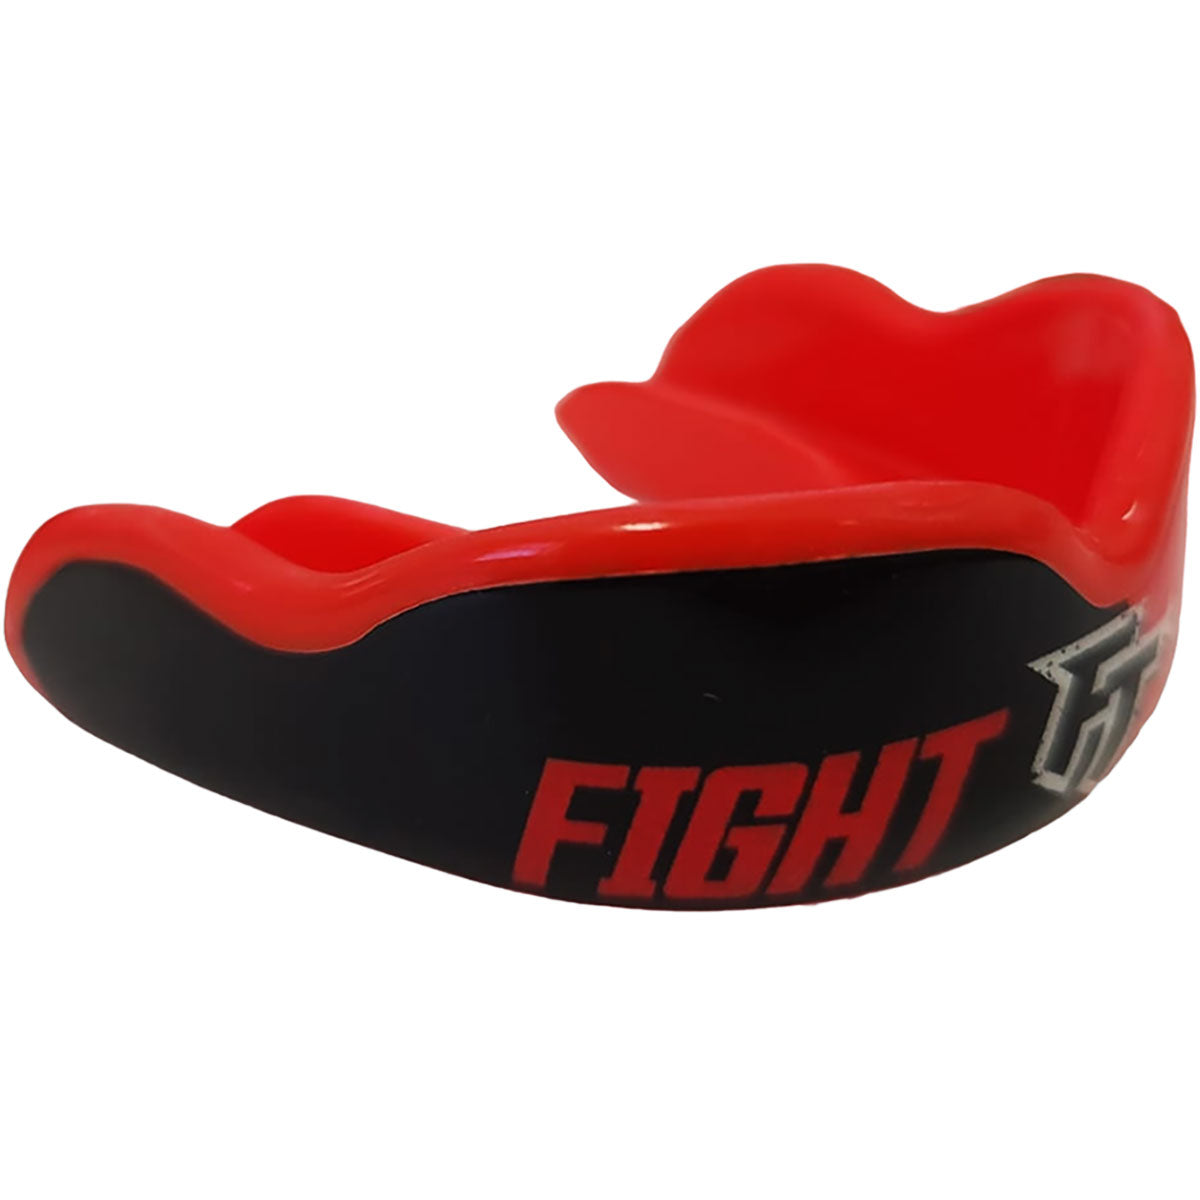 Mouthguard Protected High Impact - "Boil and Bite" Fight Trade Brand Black & Red